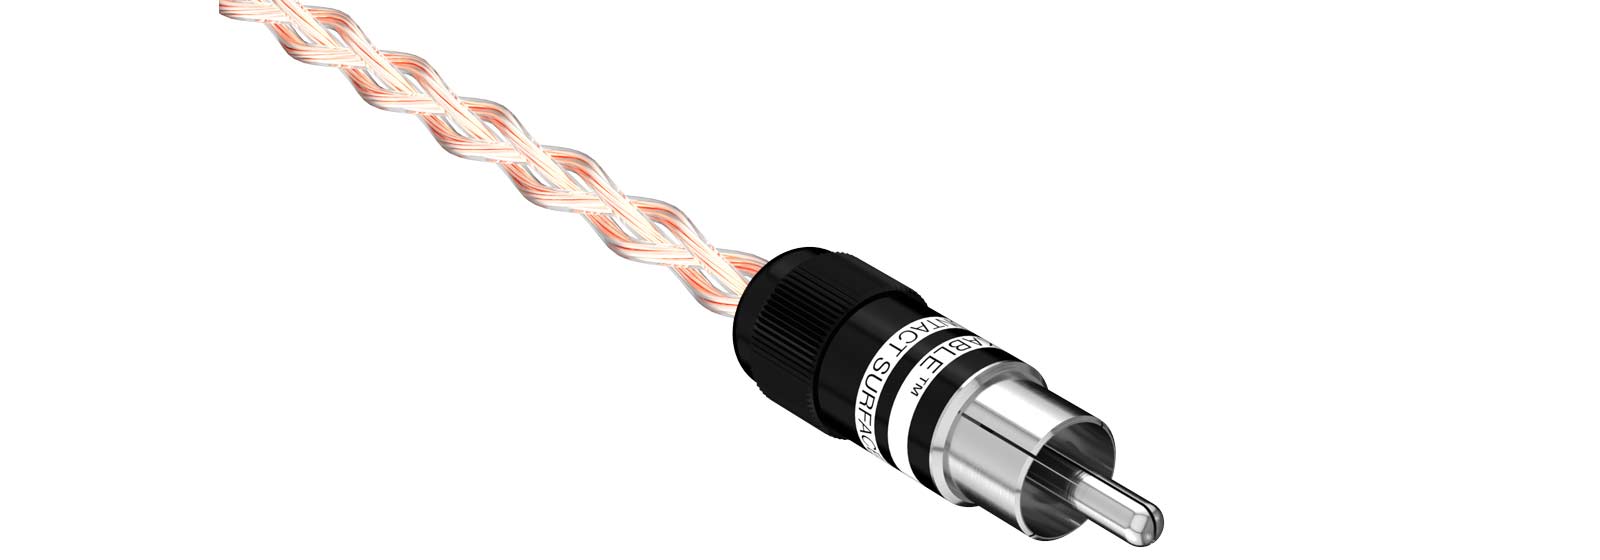 Kimber-Timbre-interconnect-cable